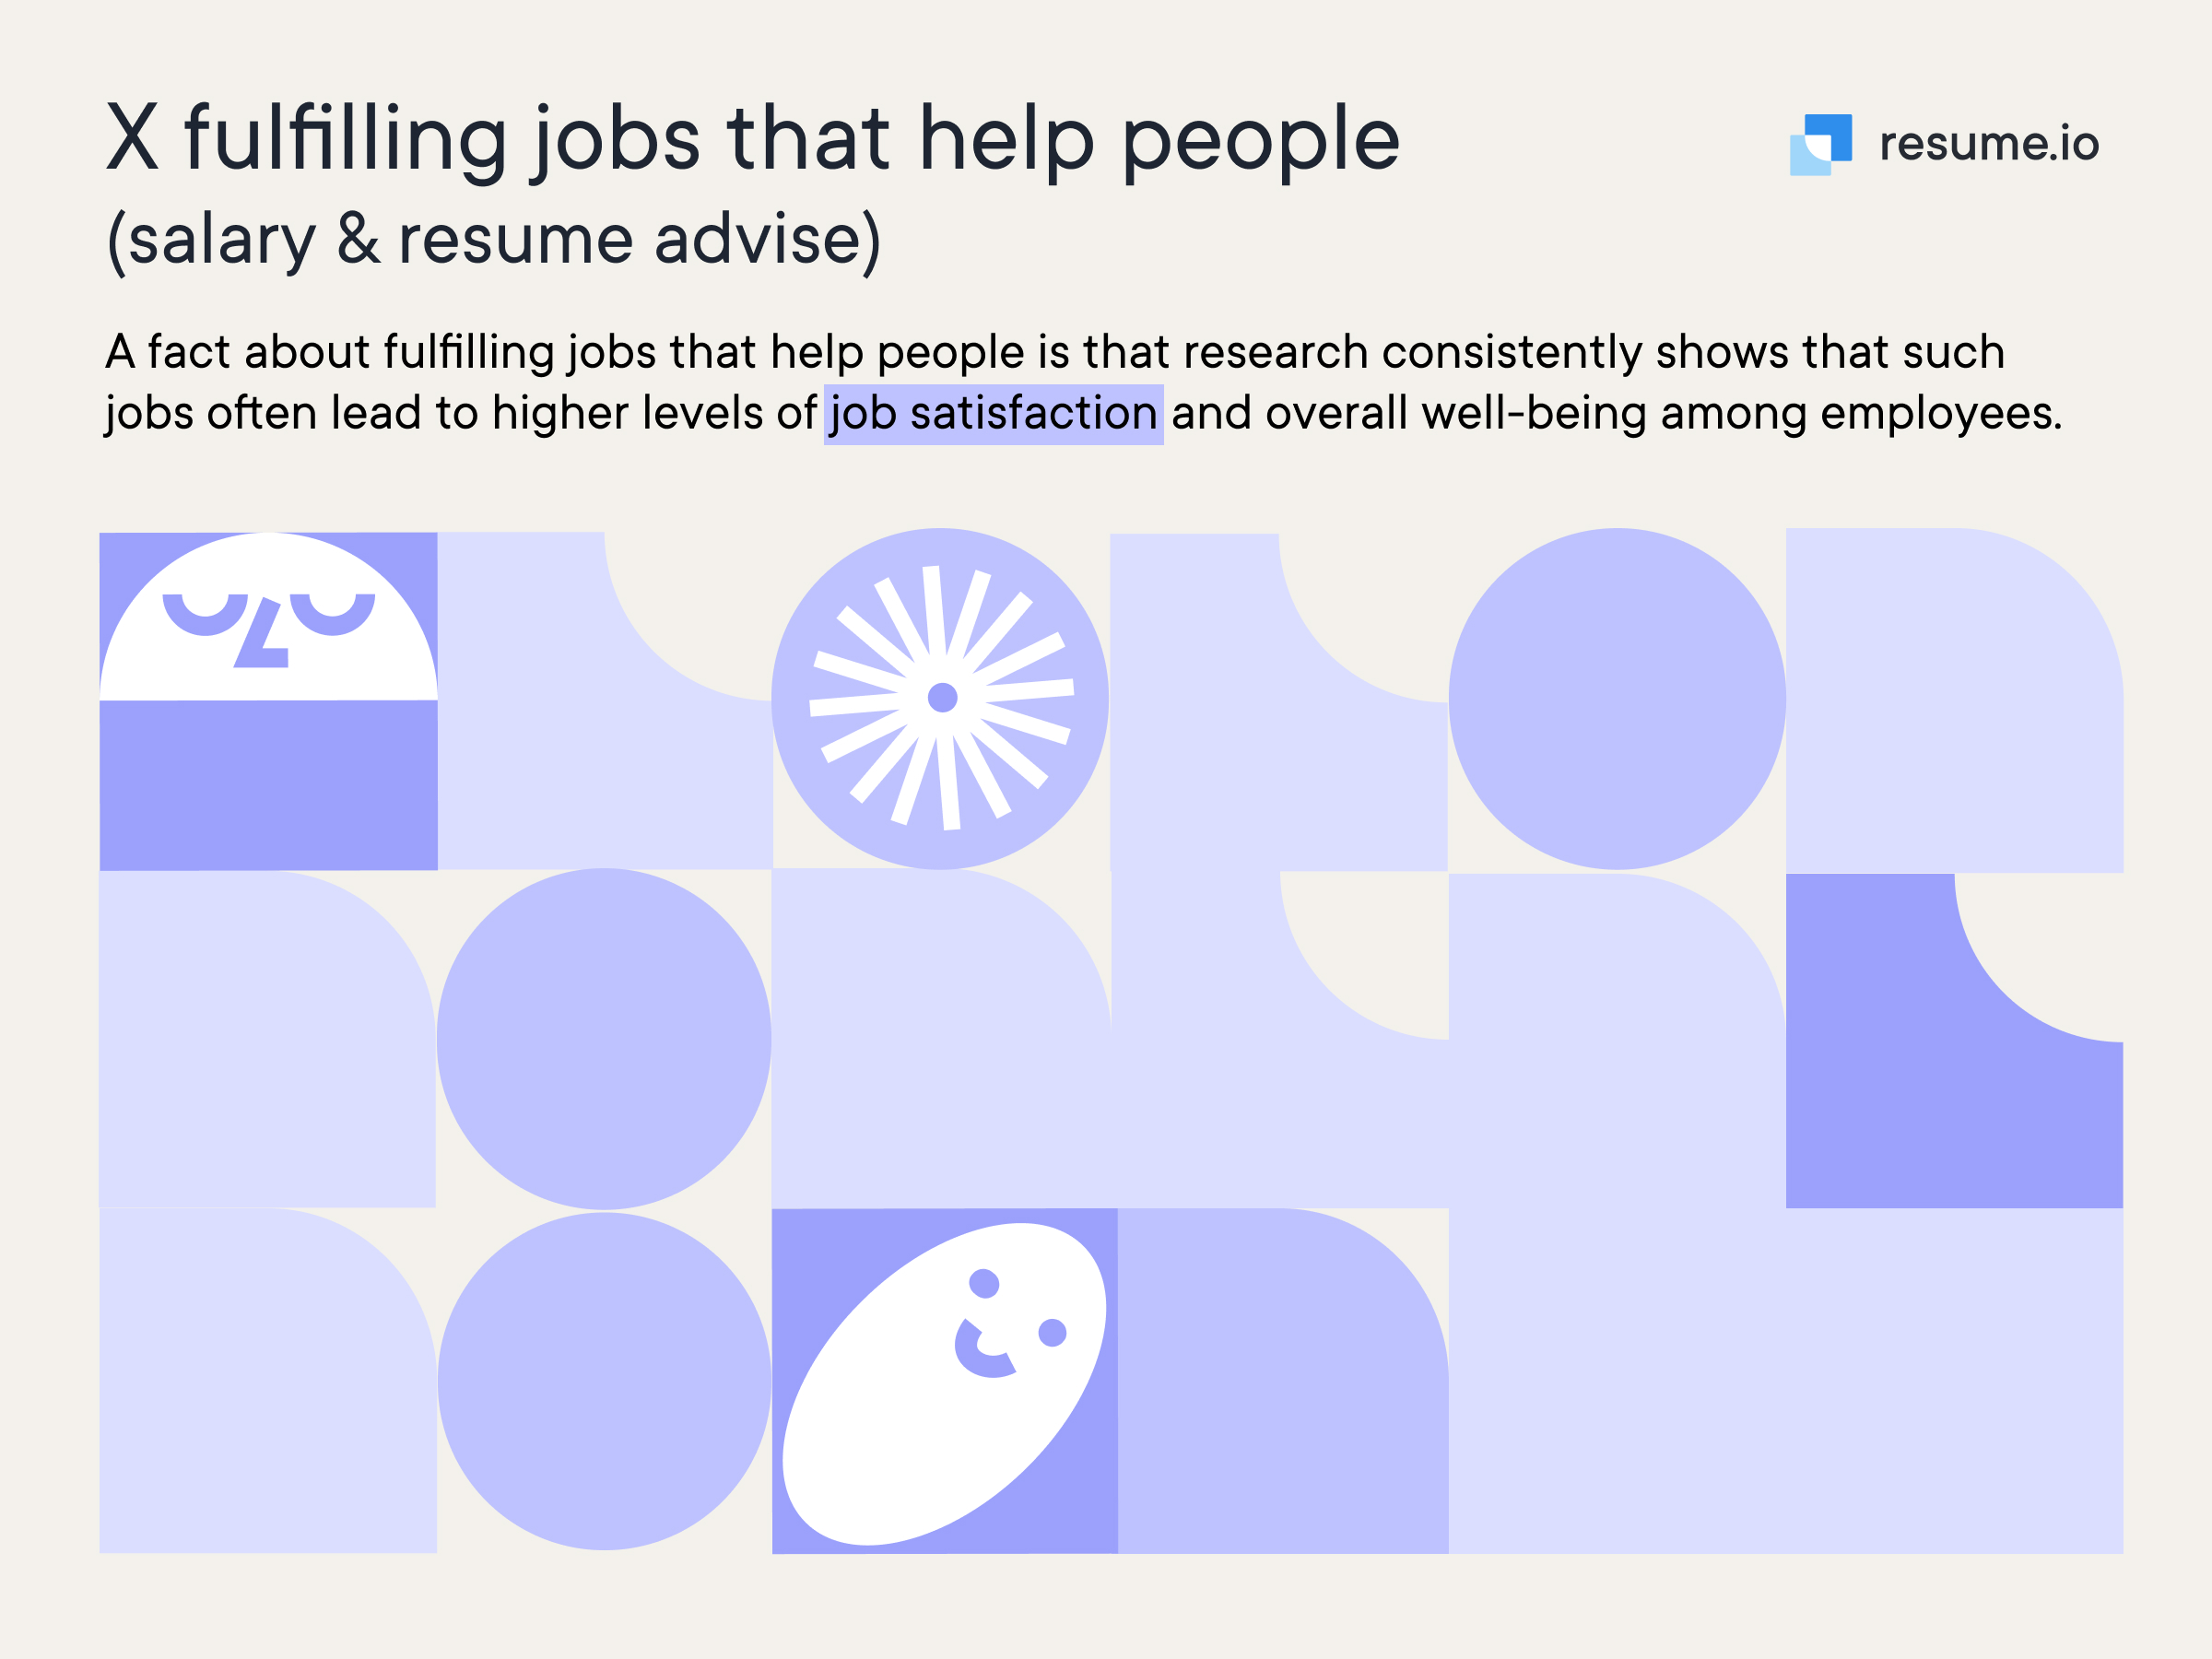 Fulfilling jobs that help people lead to higher levels of job satisfaction